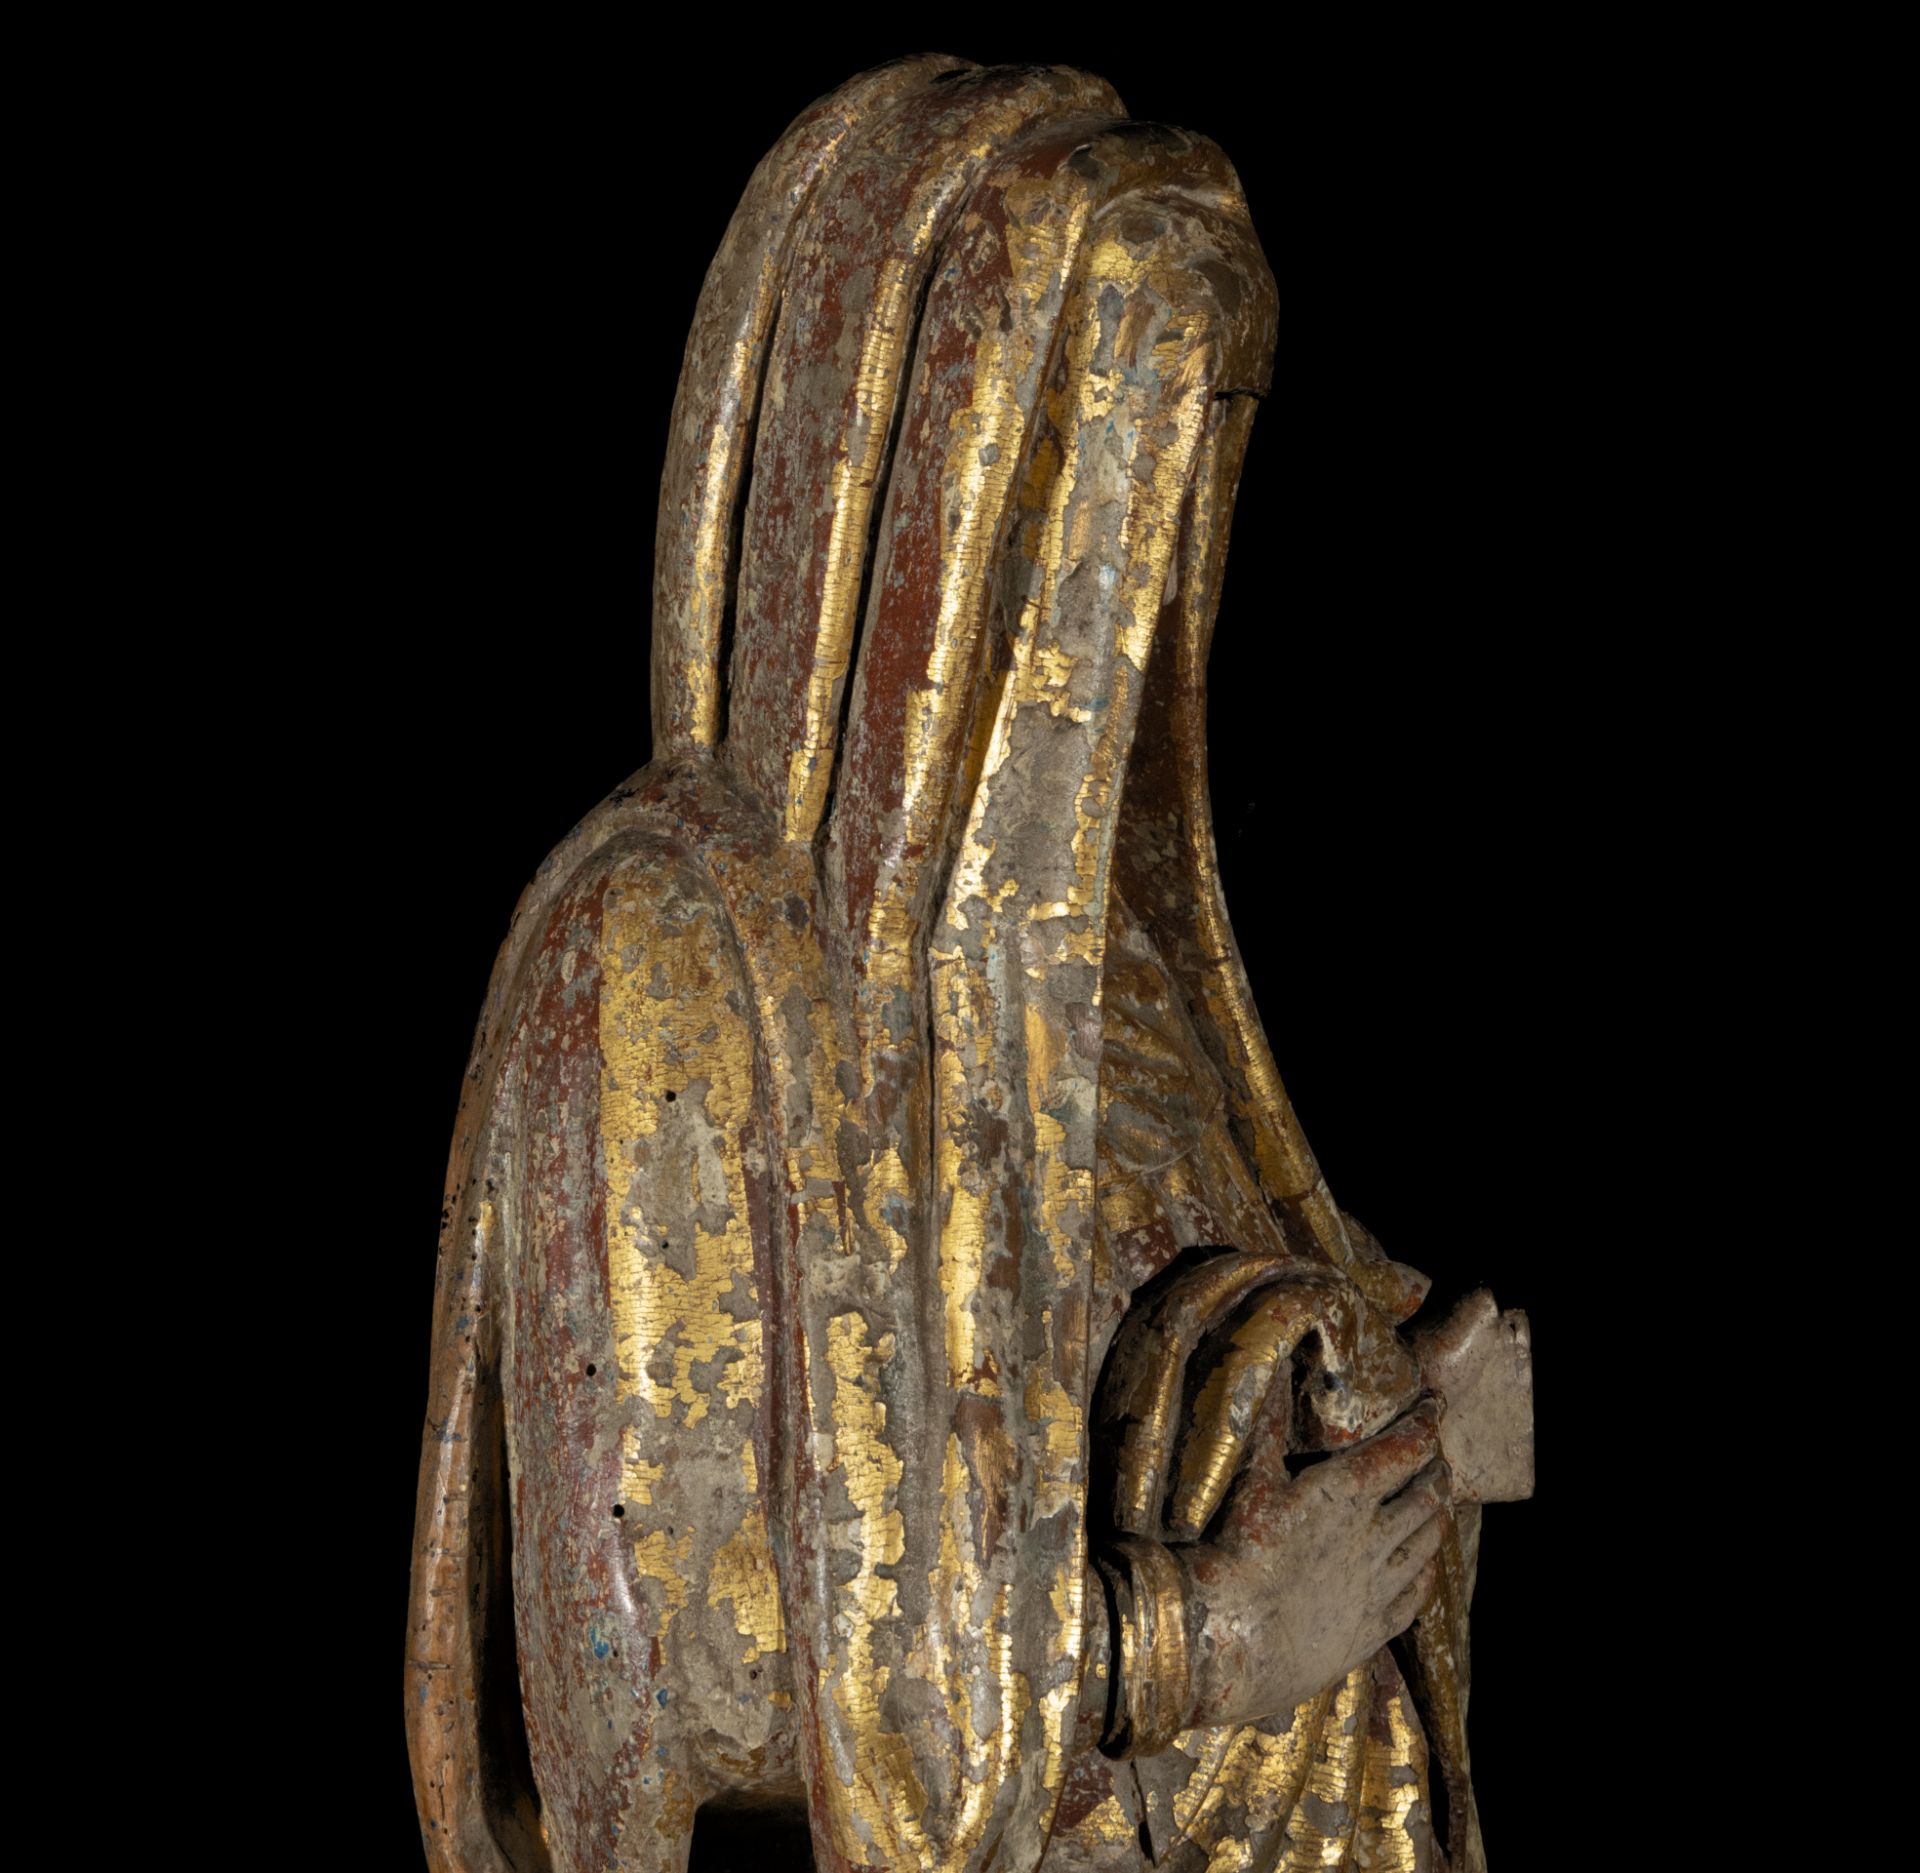 Brabant school of the 15th century - early 16th century, Great Virgin Sorrowful - Image 7 of 8